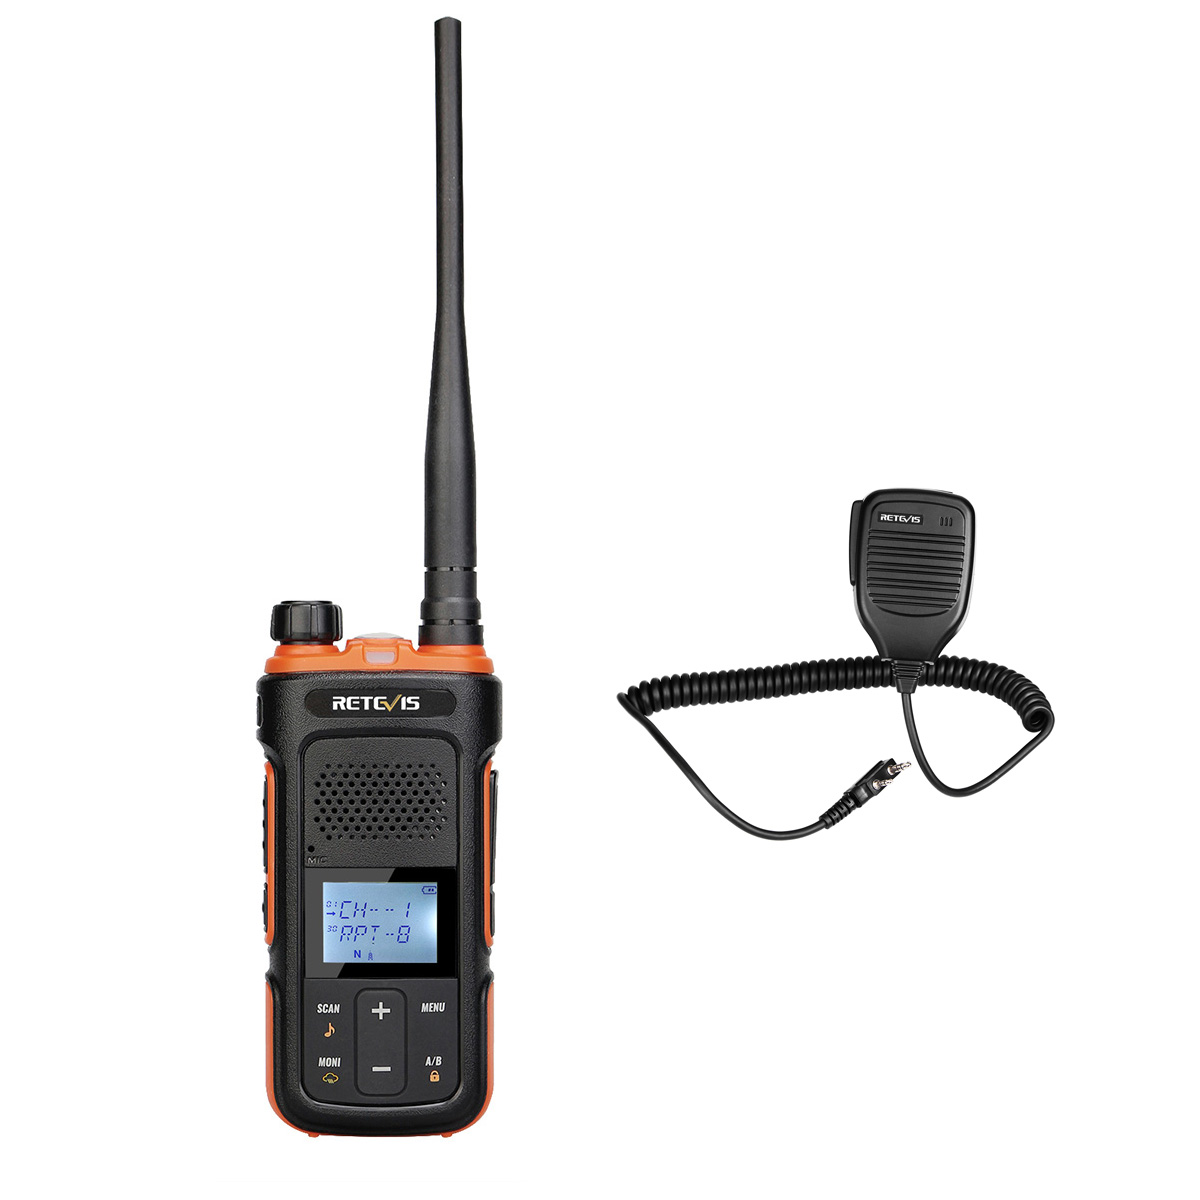 RB27 GMRS Radio set for Skiing